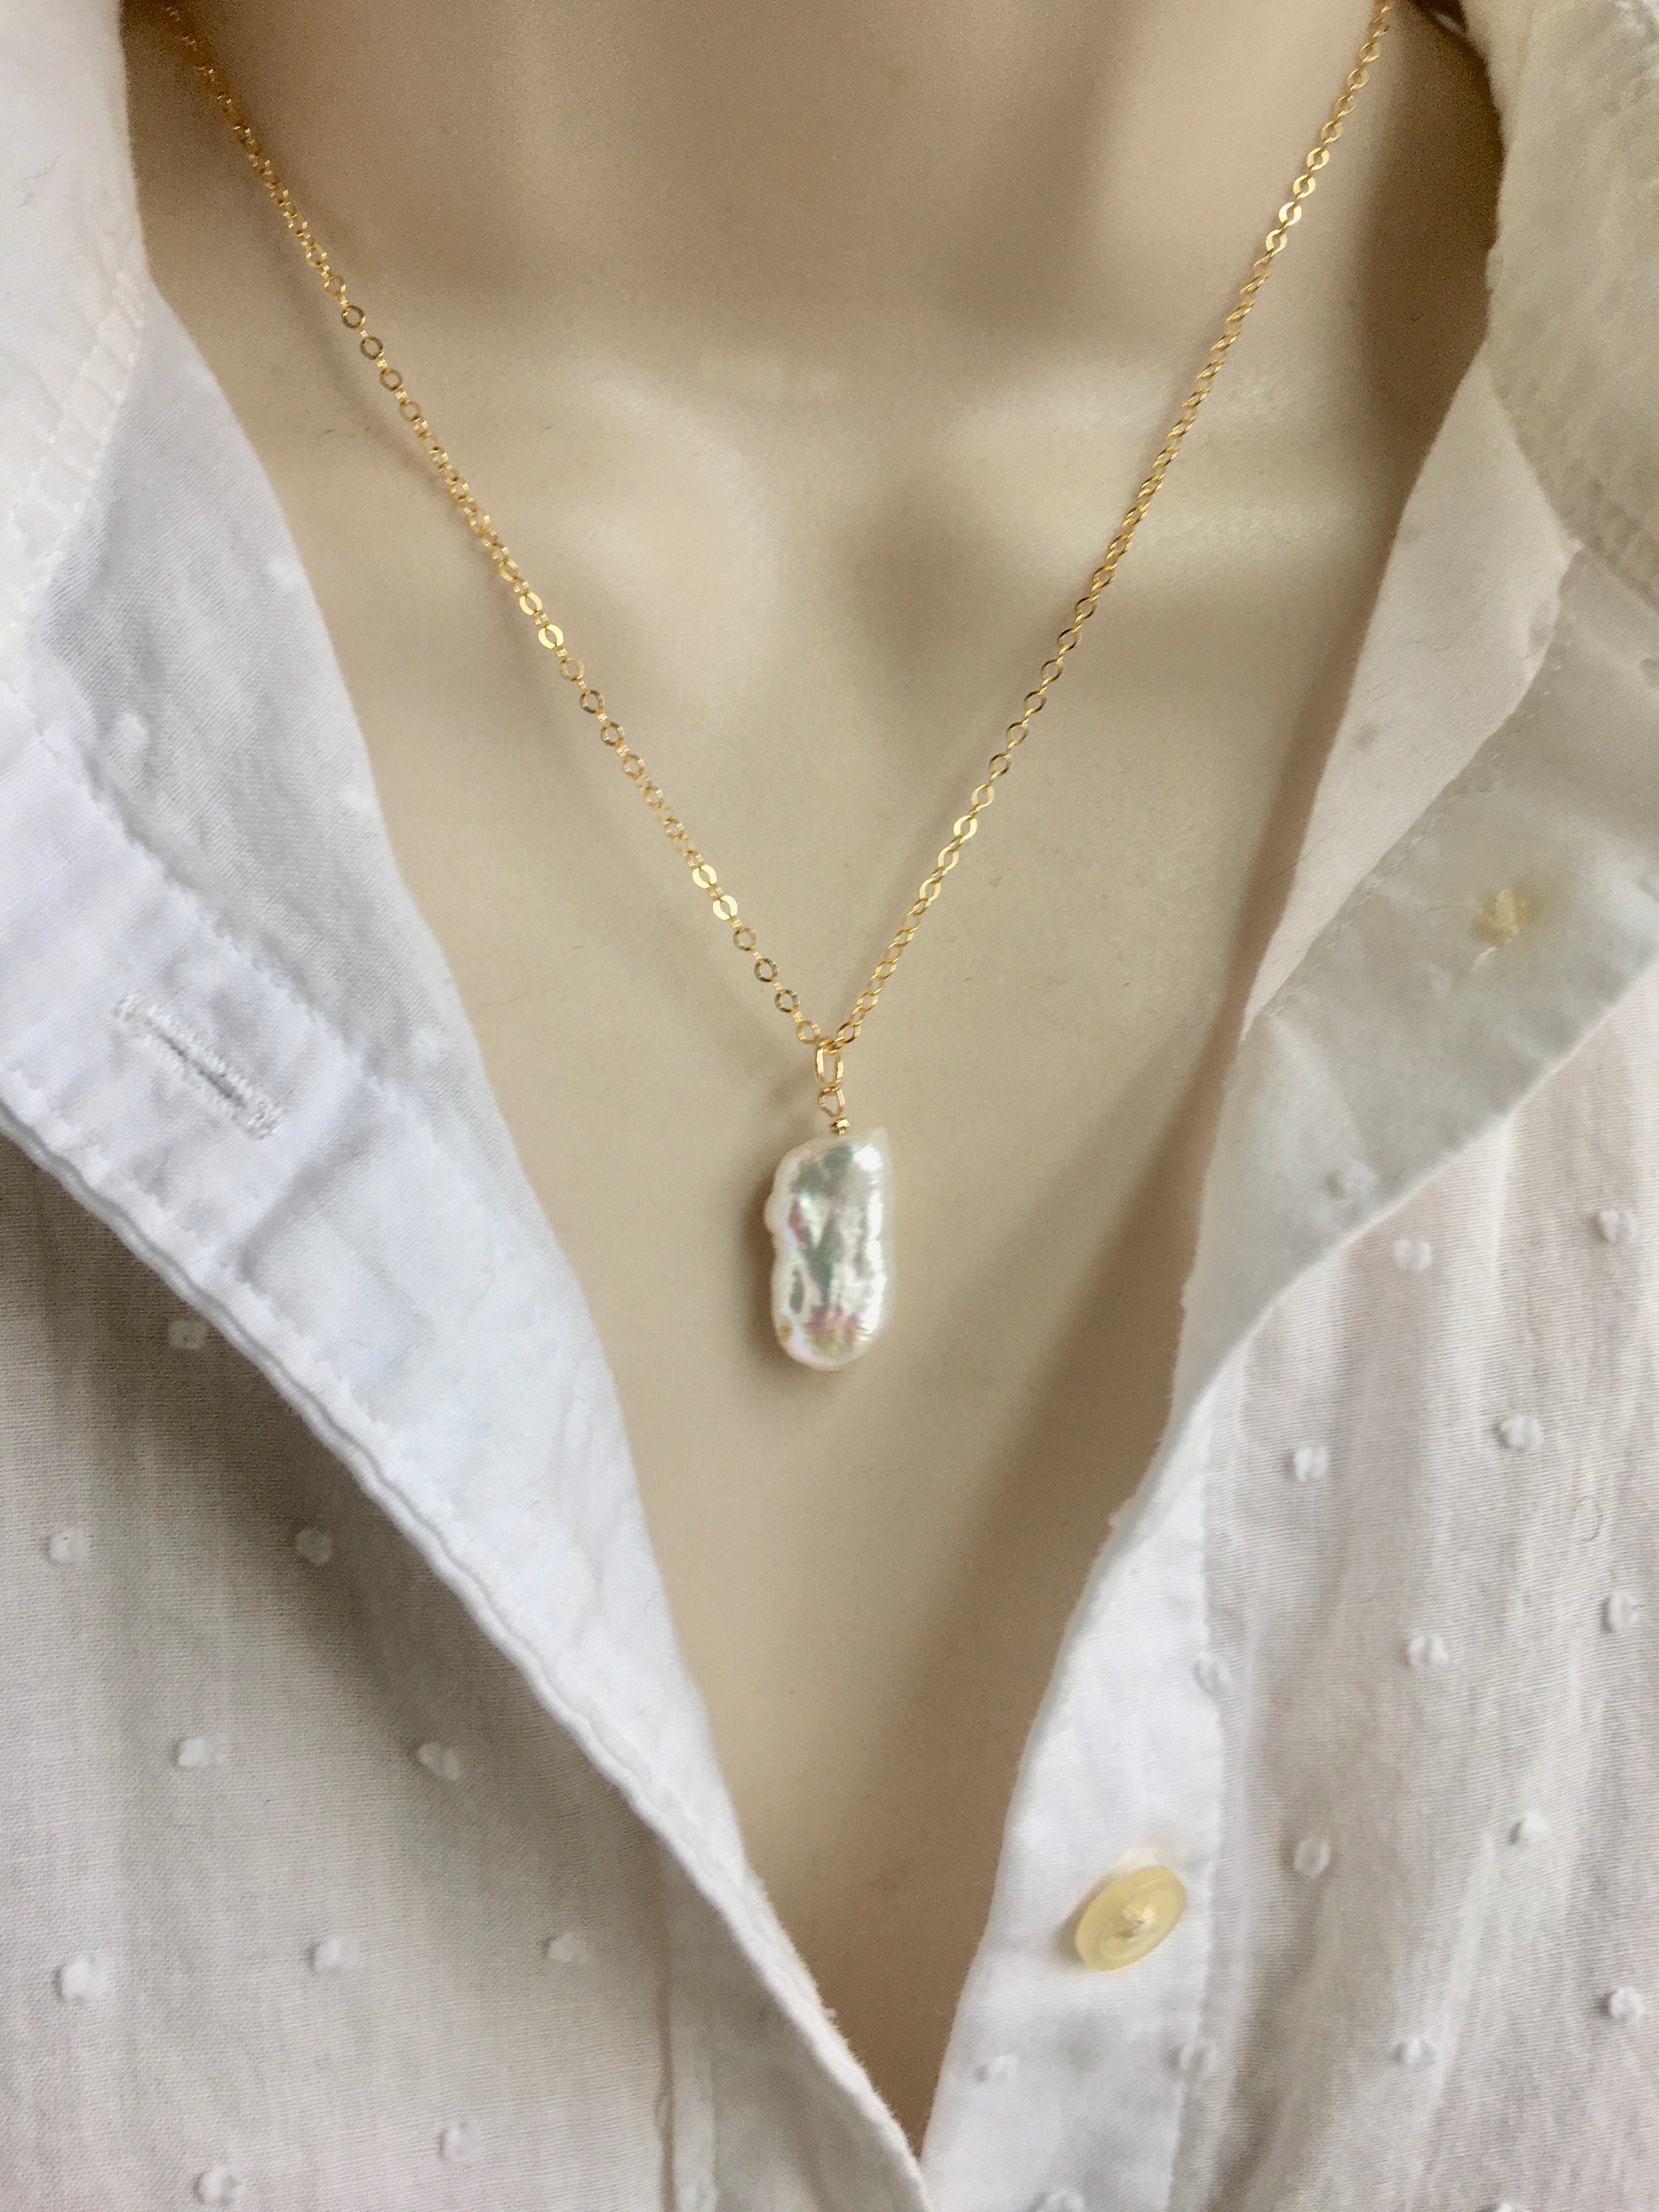 Biwa Stick Pearl Pendant Necklace - Gold Filled Chain - June Birthston –  The Cord Gallery